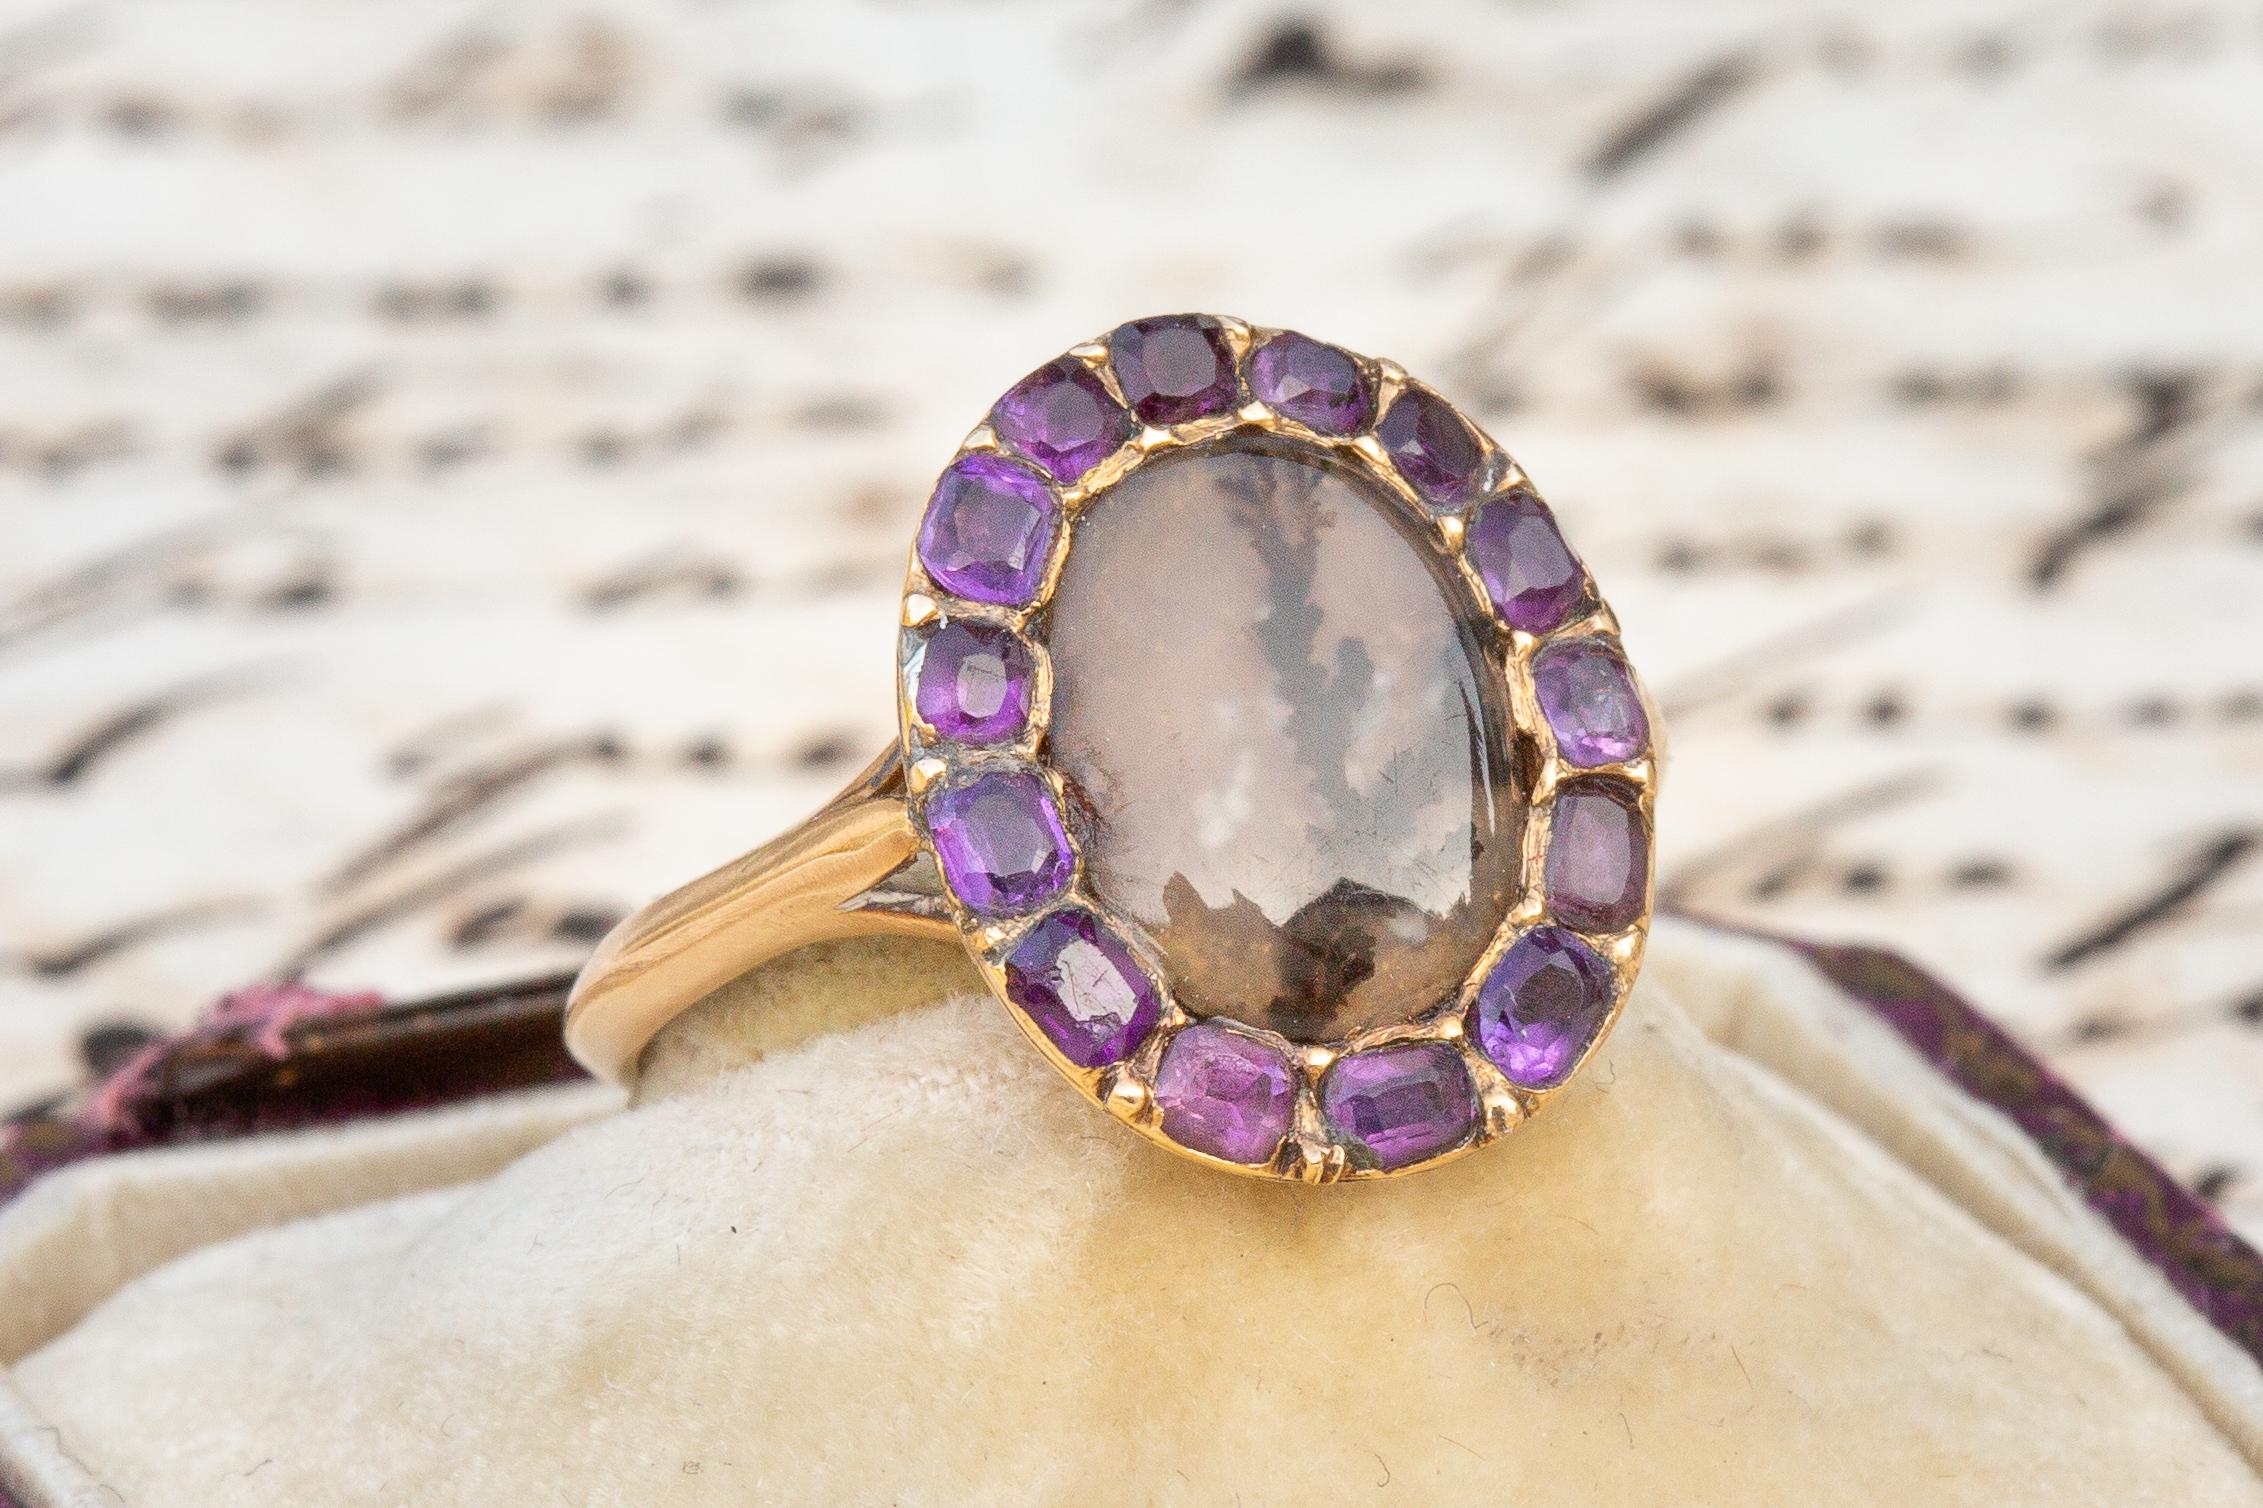 This stunning ring is typical of late 18th century Georgian era cluster rings. In the centre rests a much sought after dendritic agate surrounded by a halo of old cut amethysts. This seemingly perfect combination of gemstones was quite uncommon at